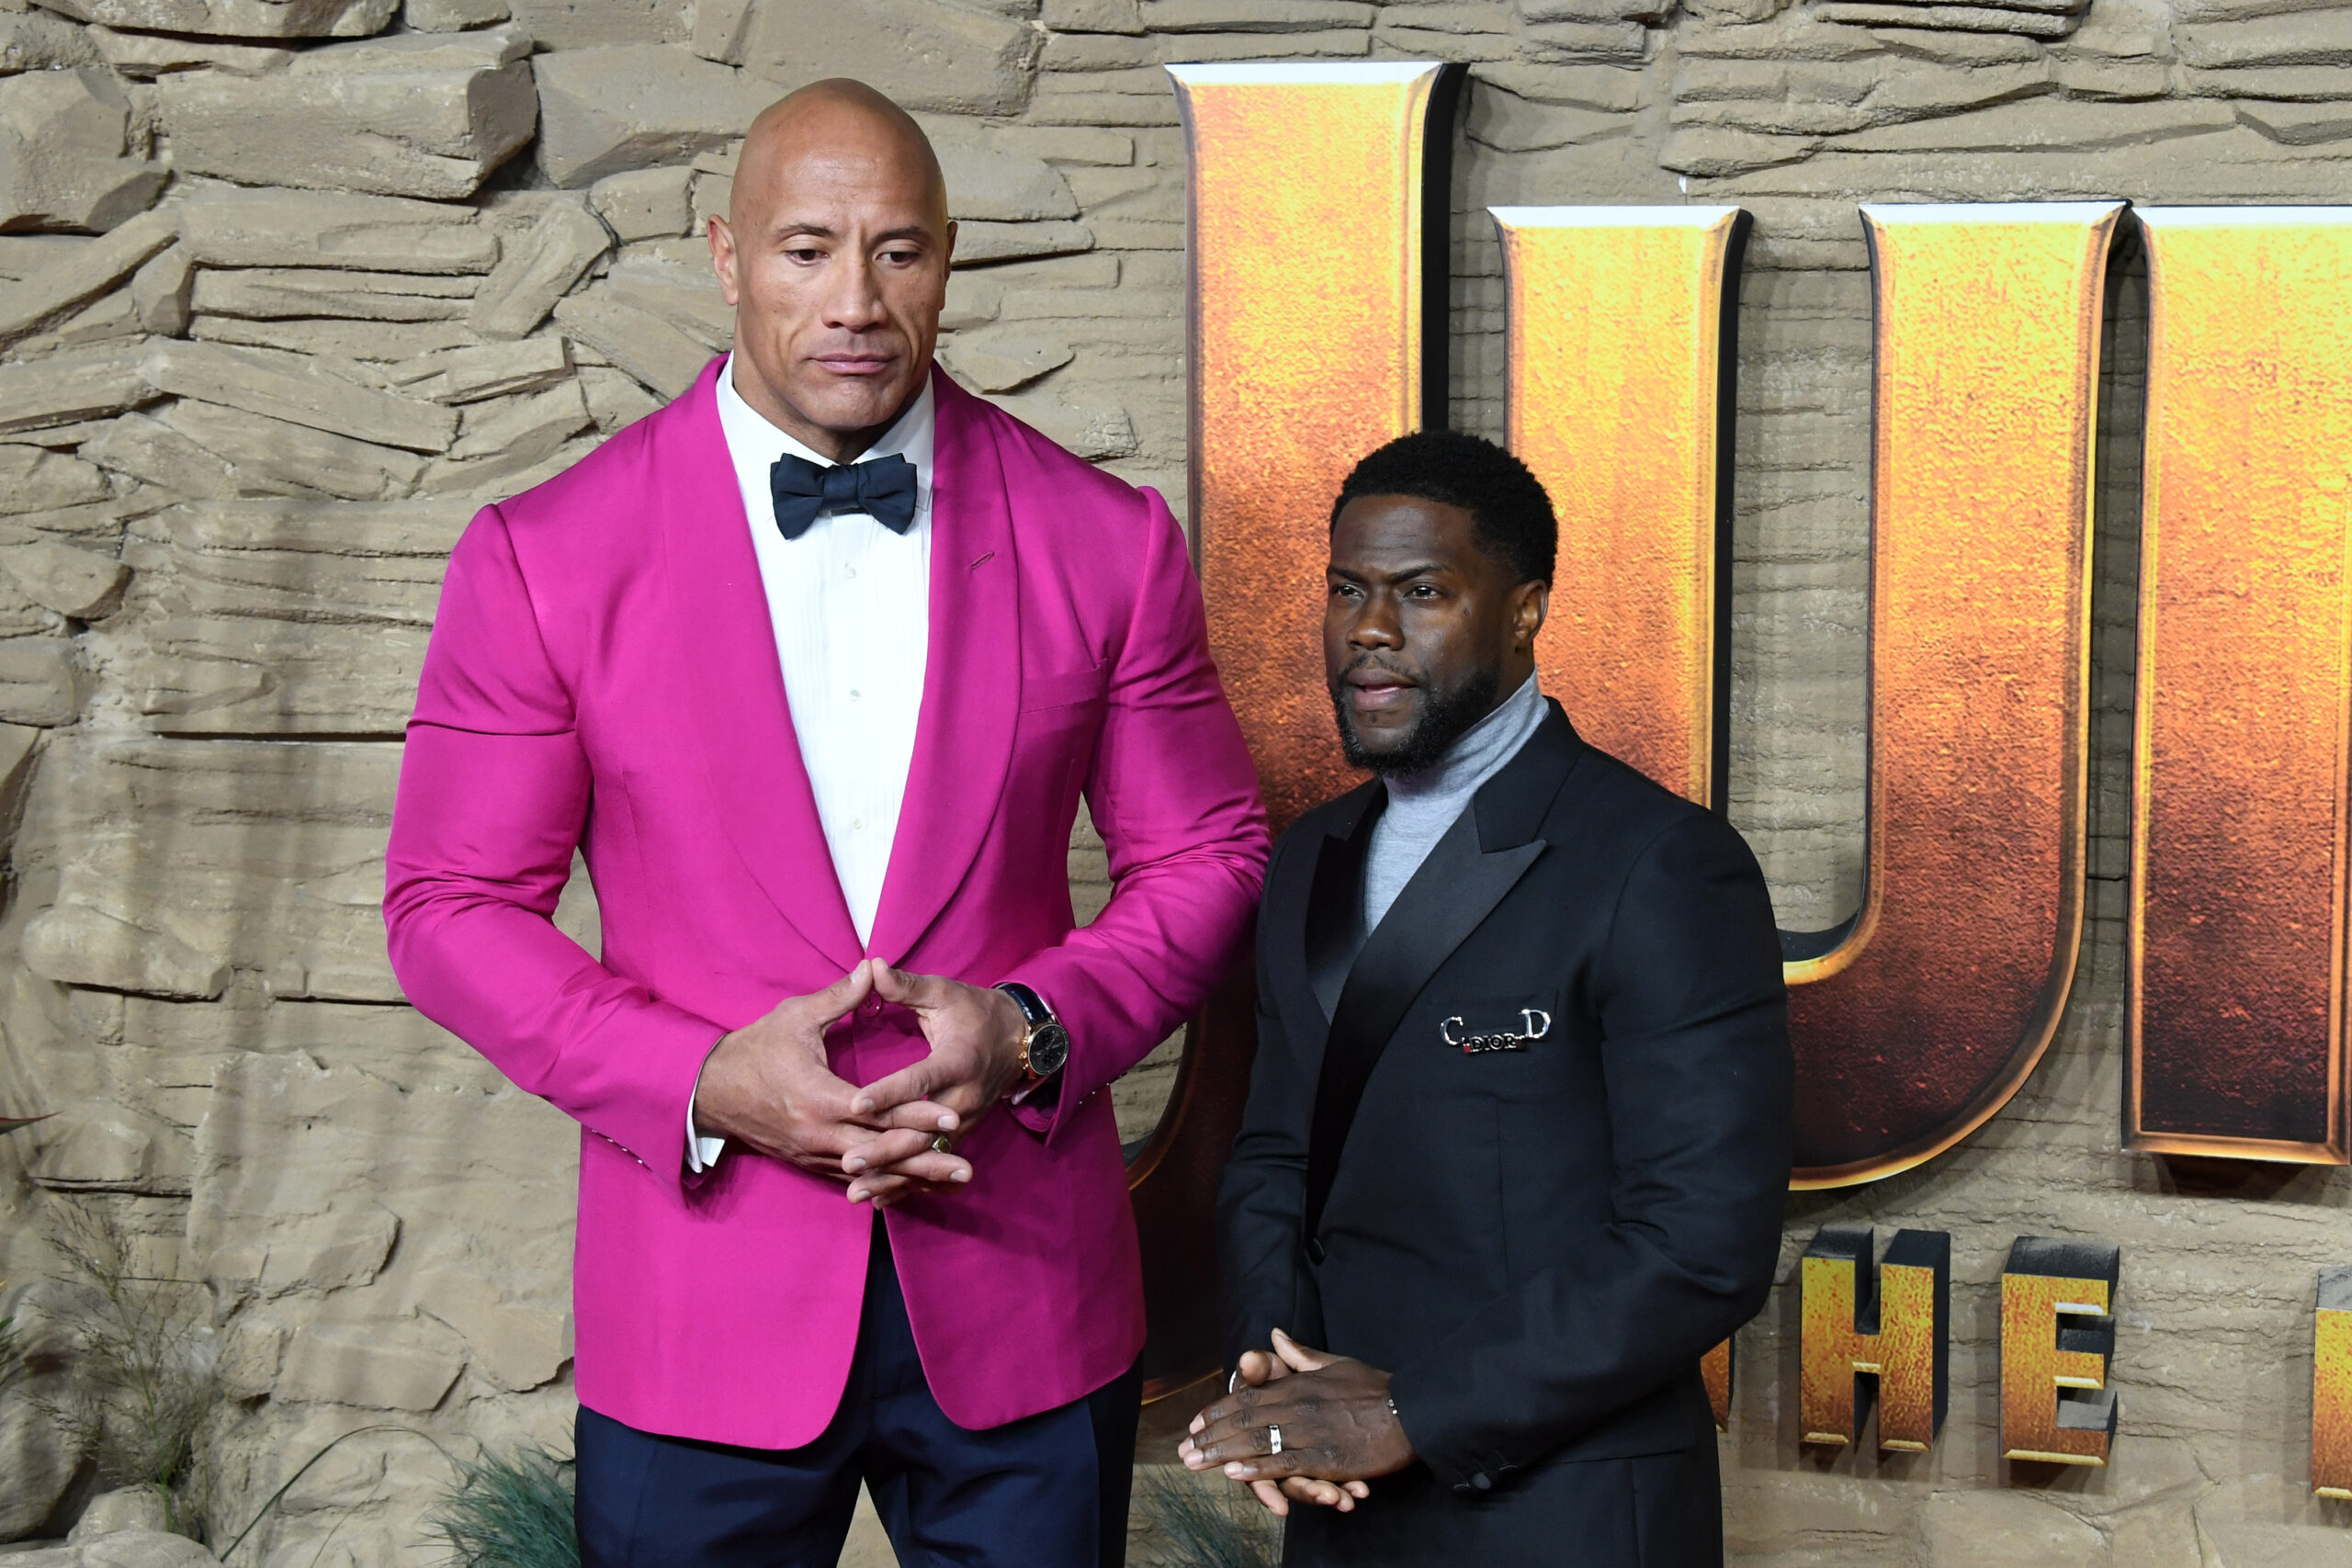 Kevin Hart, Dwayne Johnson and Gabrielle Union Among A-listers Accused of Exceeding California Water Budget Amid Severe Drought 